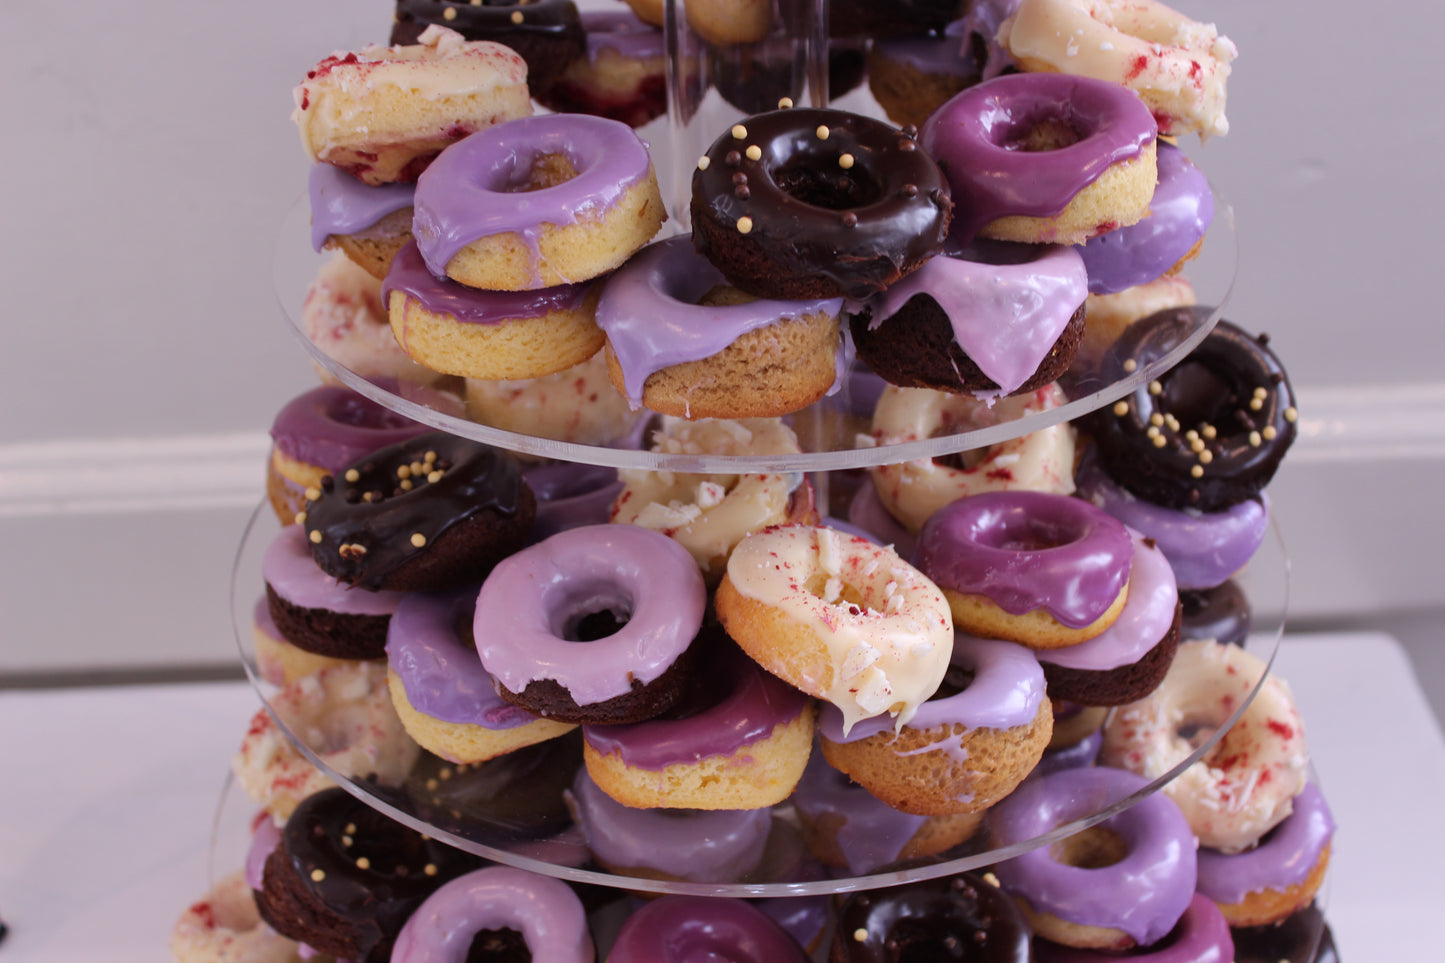 Donut Tower with Cutting Cake, Purple & Chocolate